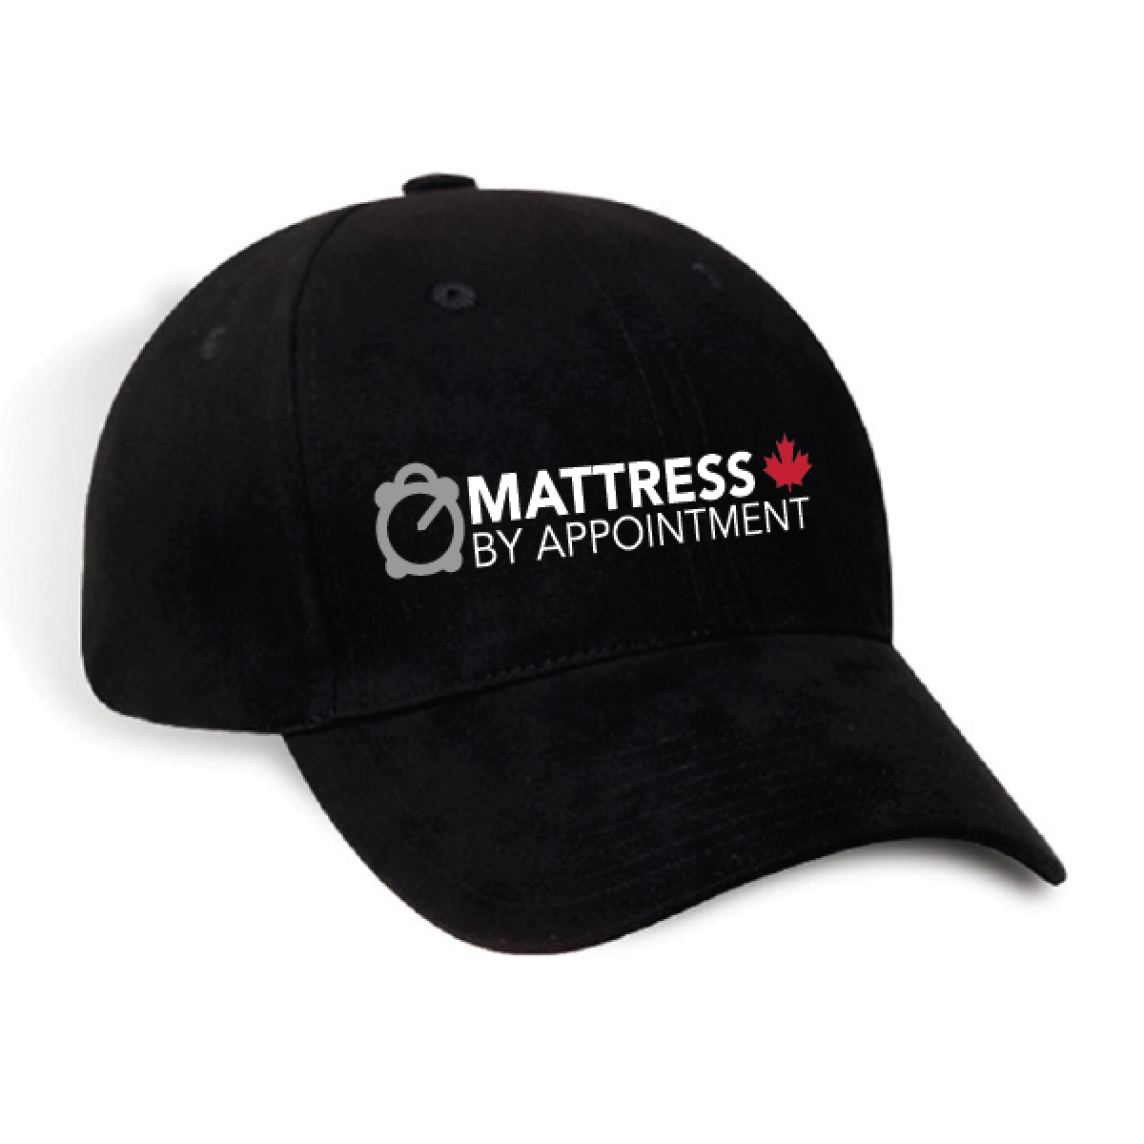 Mattress By Appointment Embroidered Ball Cap in Black